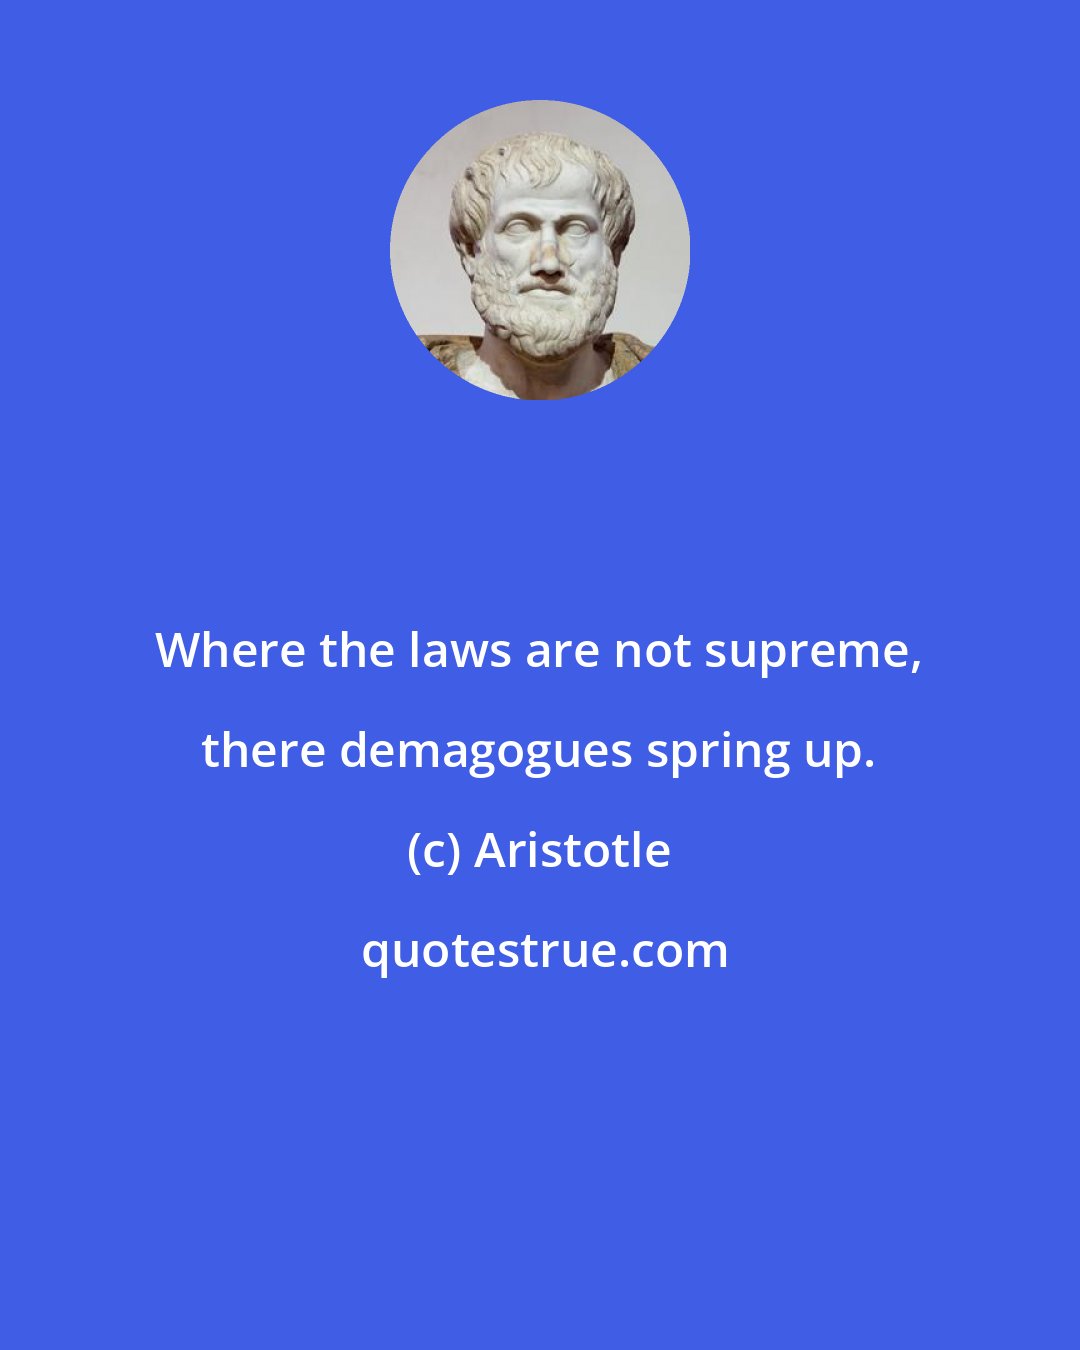 Aristotle: Where the laws are not supreme, there demagogues spring up.